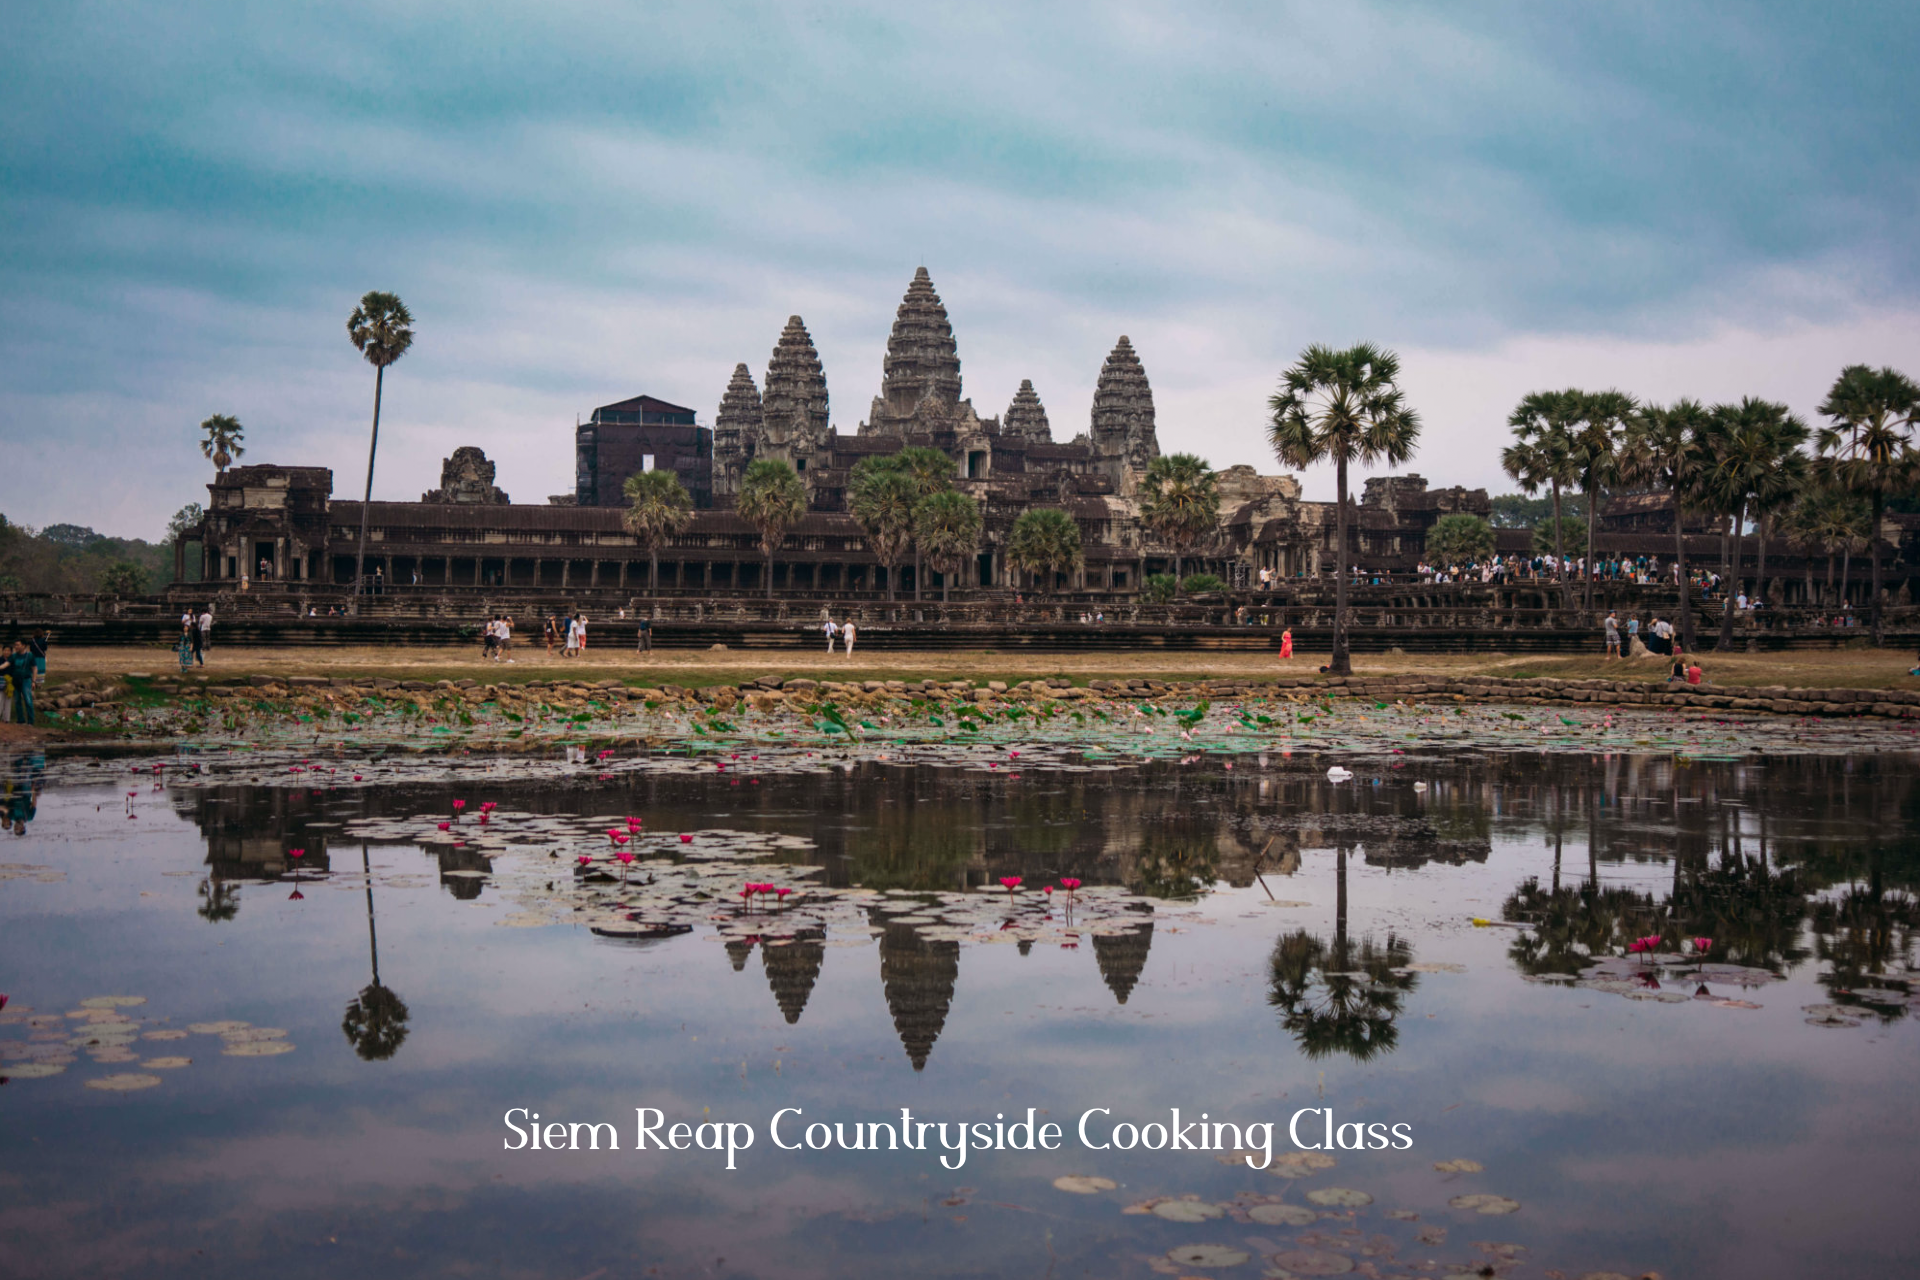 Angkor Wat by Siem Reap Countryside Cooking Class